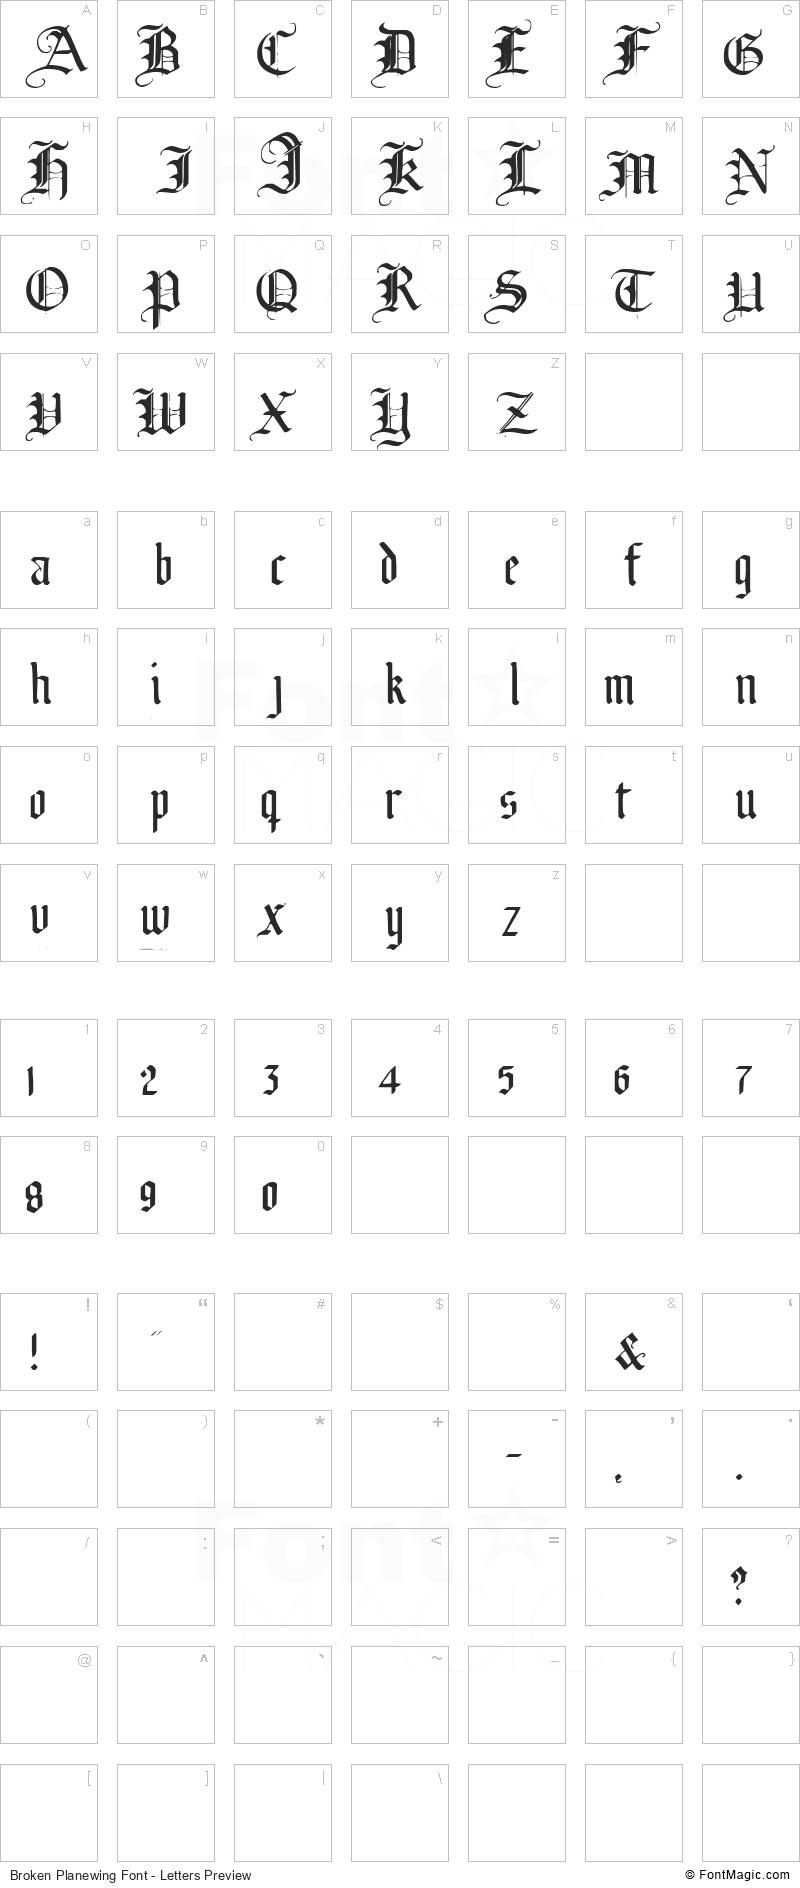 Broken Planewing Font - All Latters Preview Chart